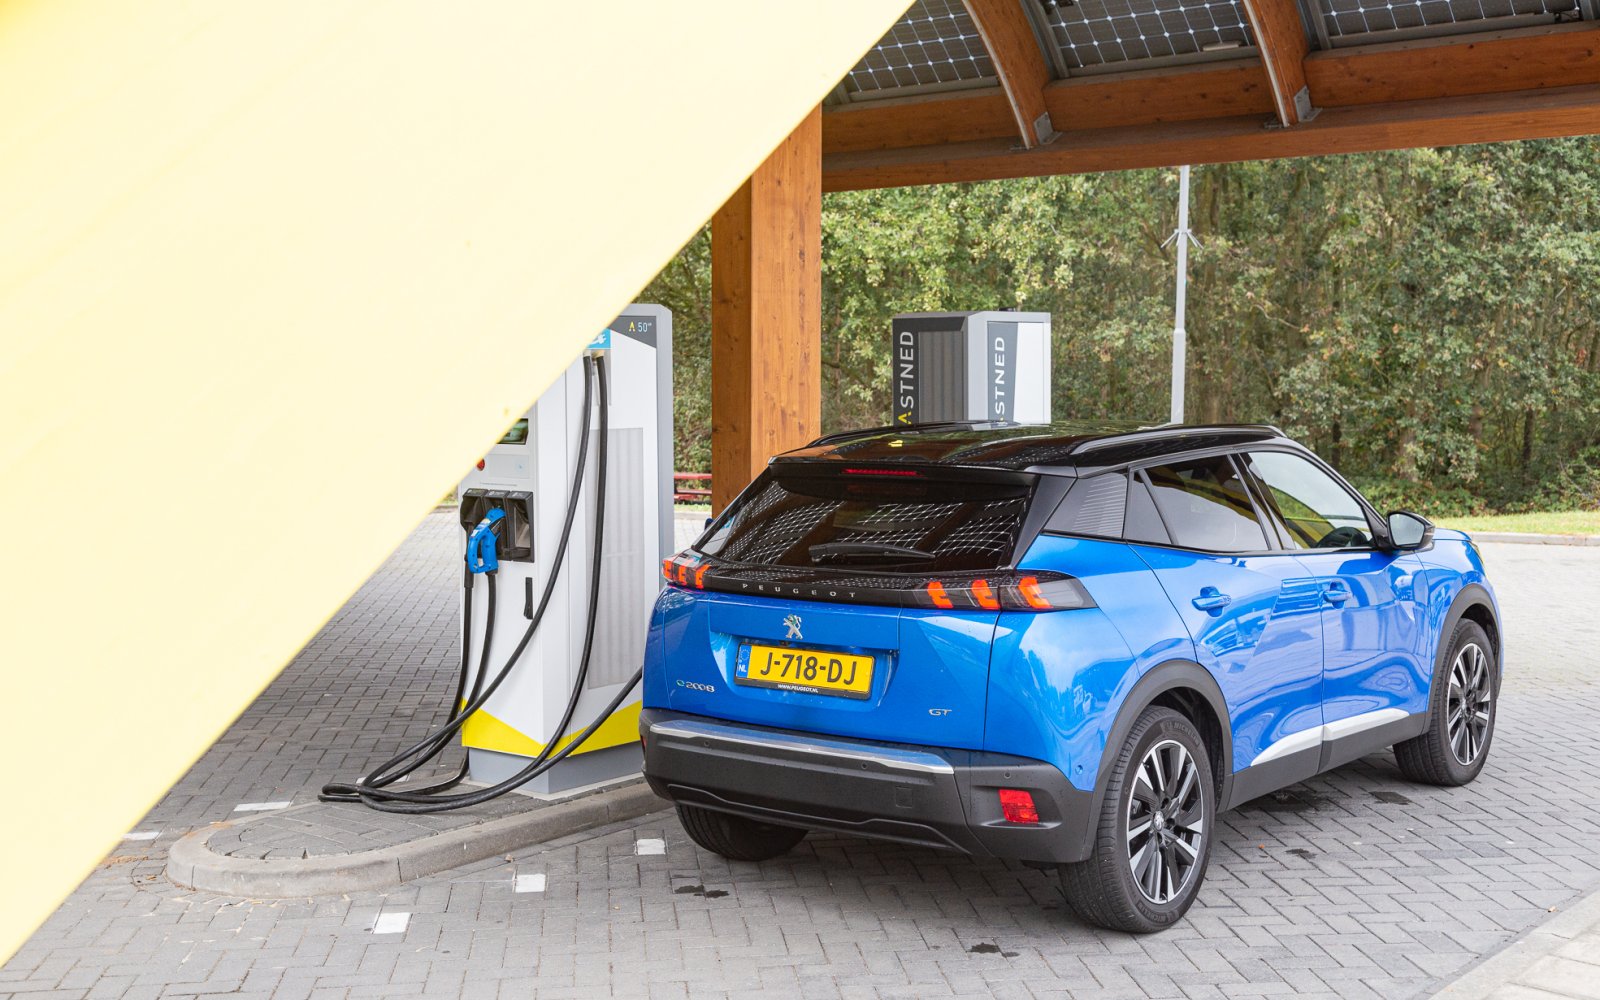 Top 10 - These electric cars came furthest in our action range test